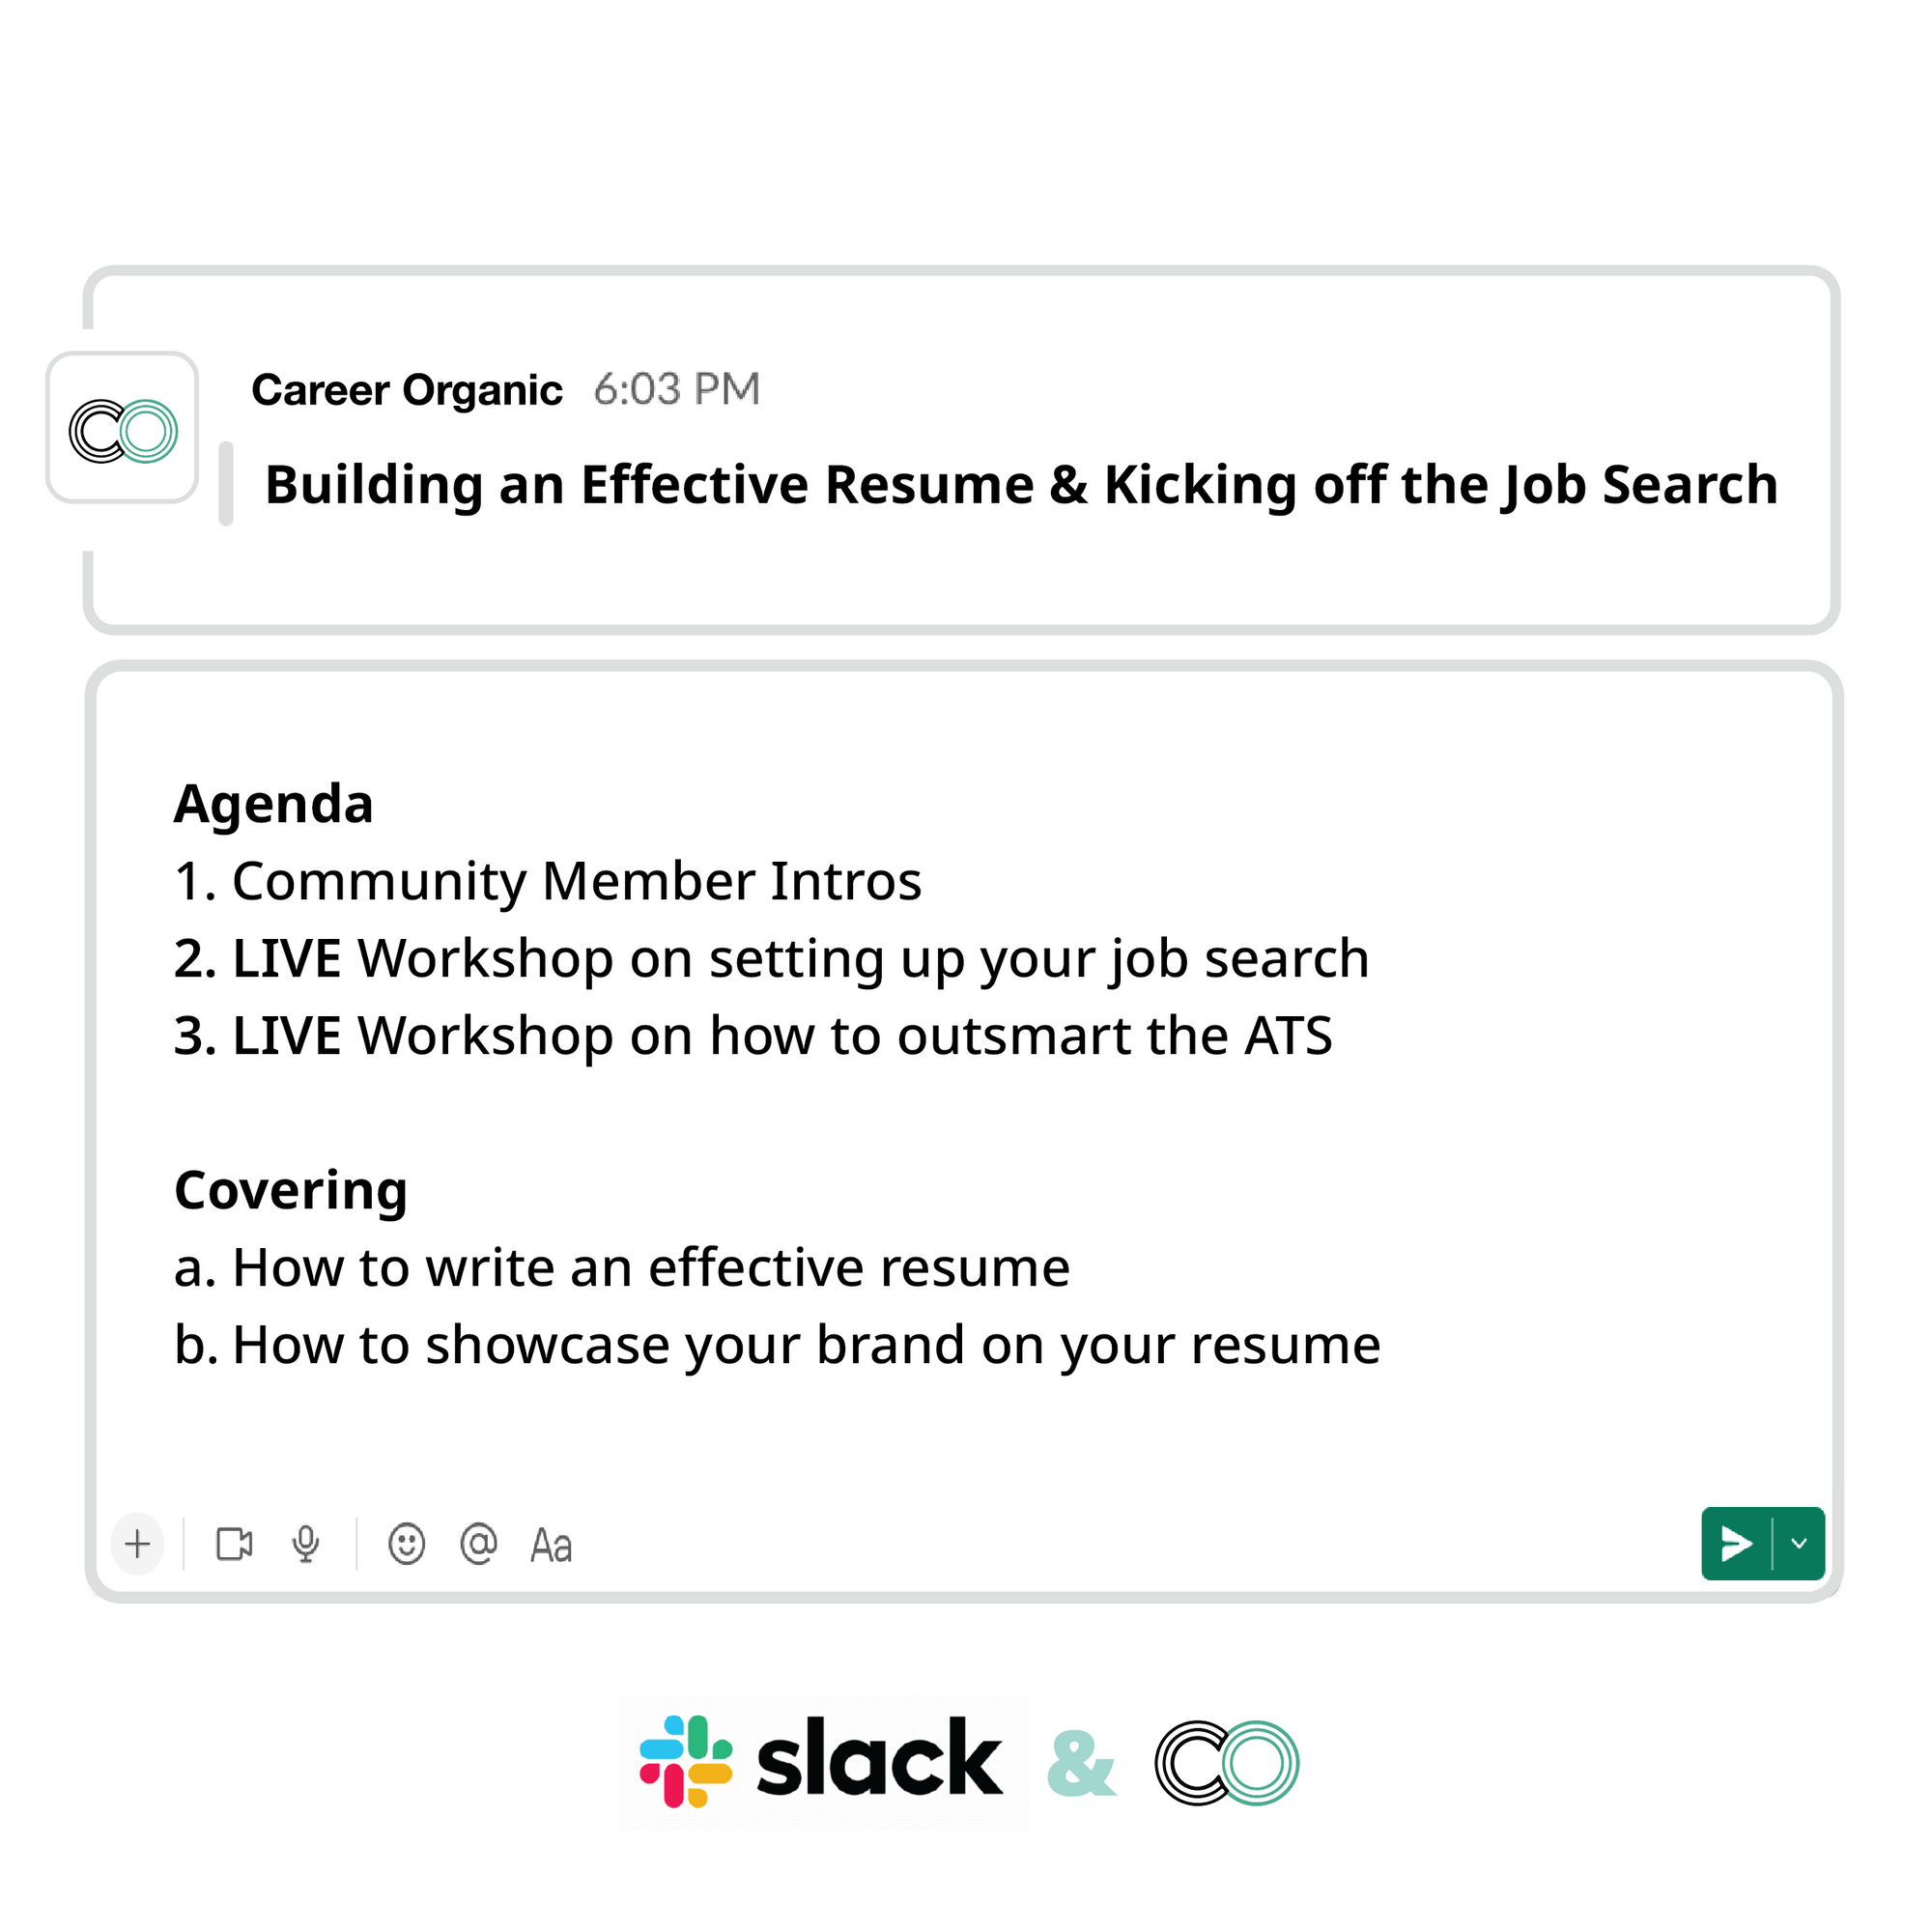 slack messages showing the agenda for a resume & job search group coaching course